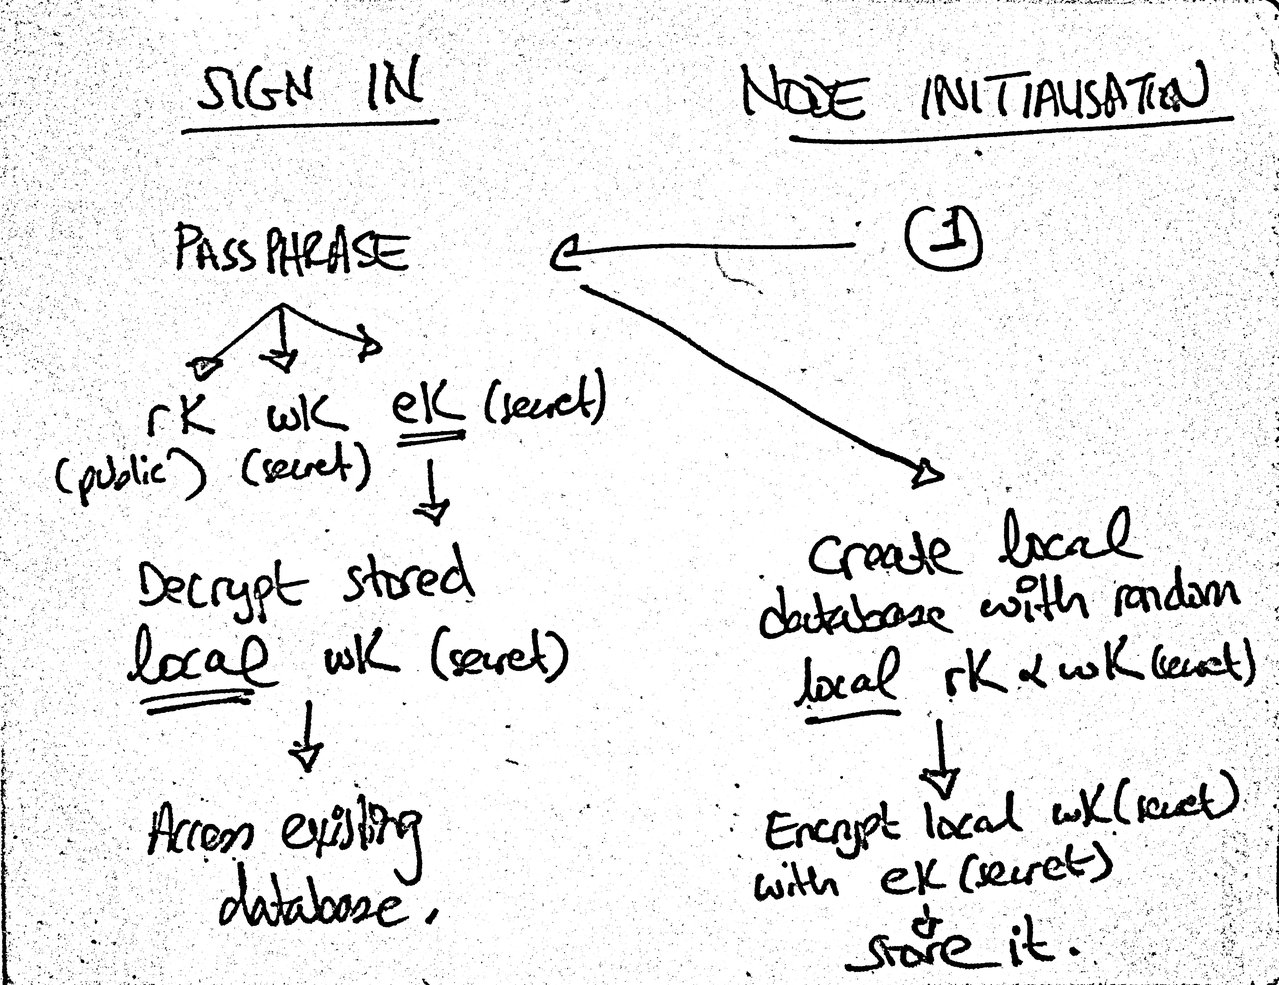 The separate sign-in versus node initialisation flow mentioned in the bullet point above.